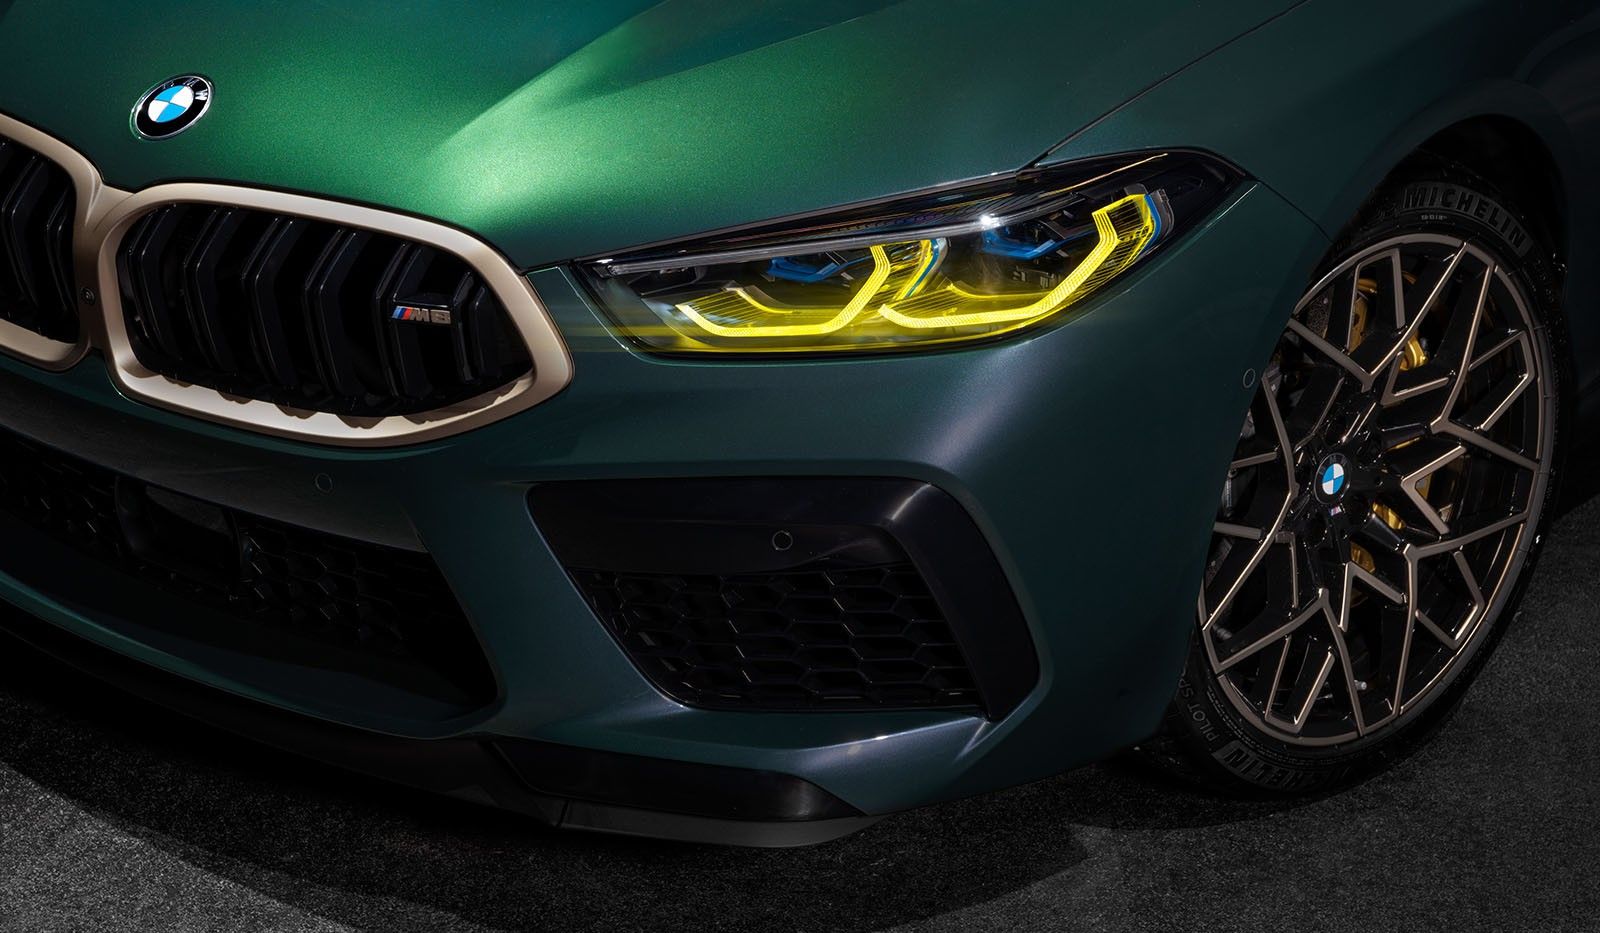 Perfect storm: BMW M8 Gran Coupé First Edition